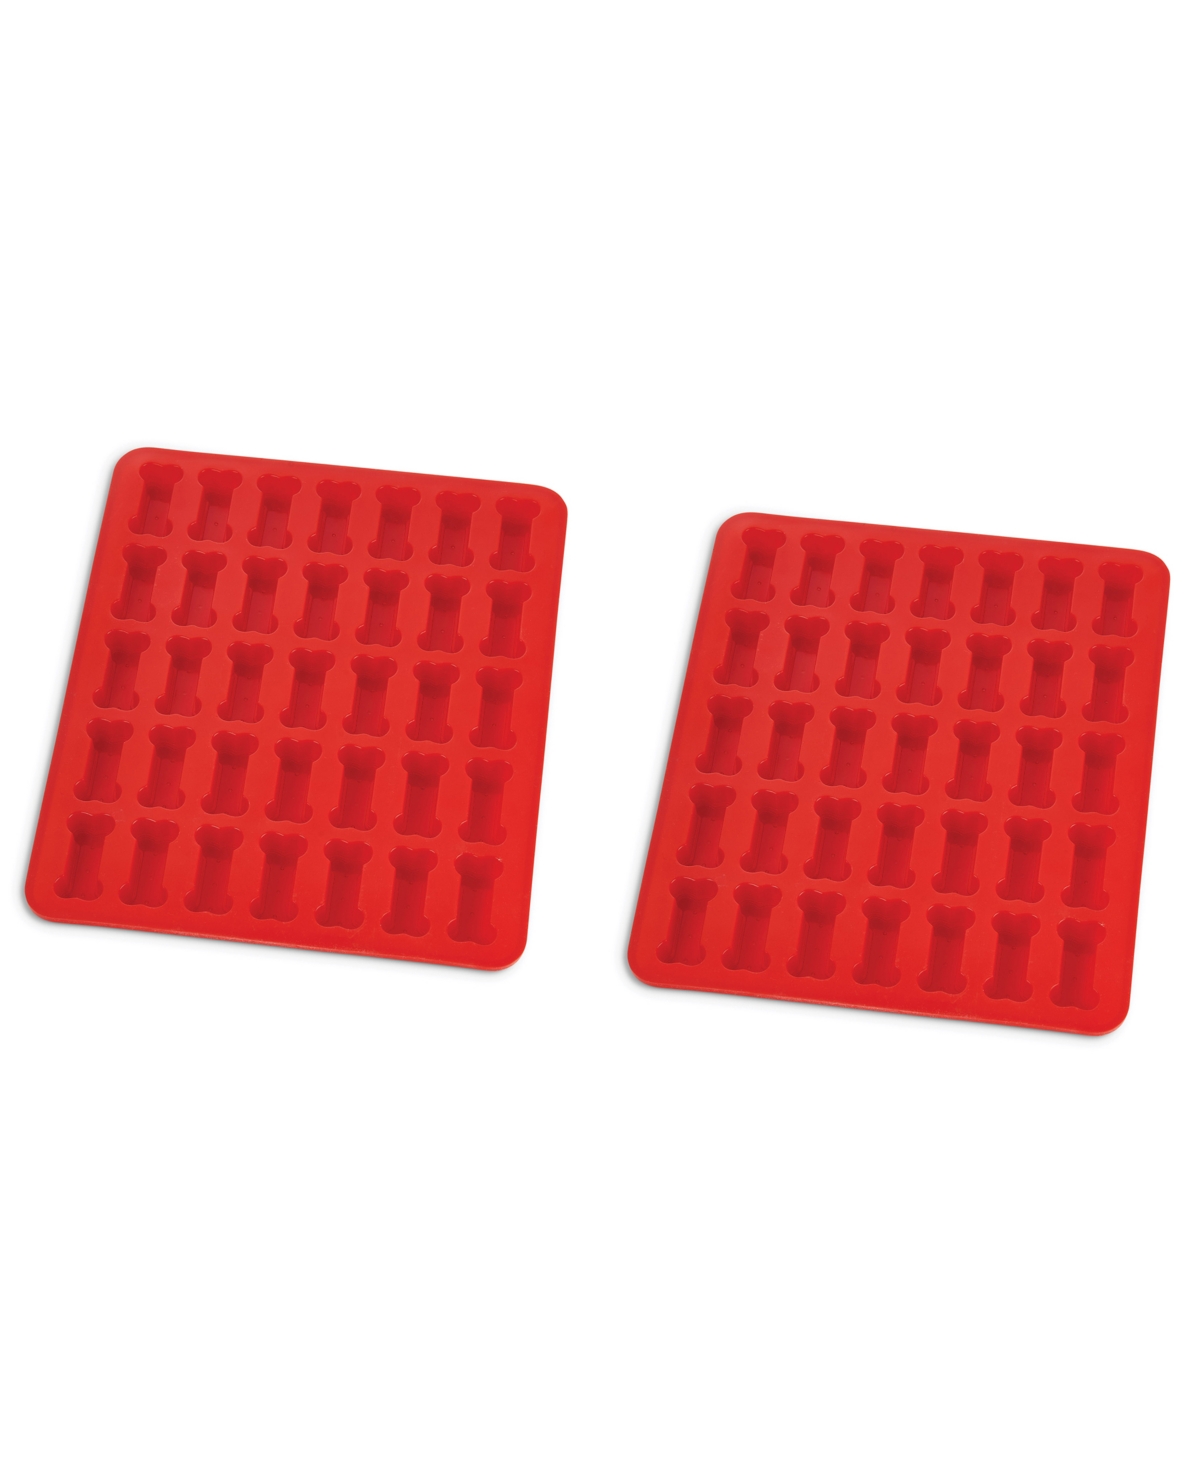 Mrs. Anderson's Baking Set Of 2 Dog Biscuit Mold, Non-stick European-grade Silicone In Red